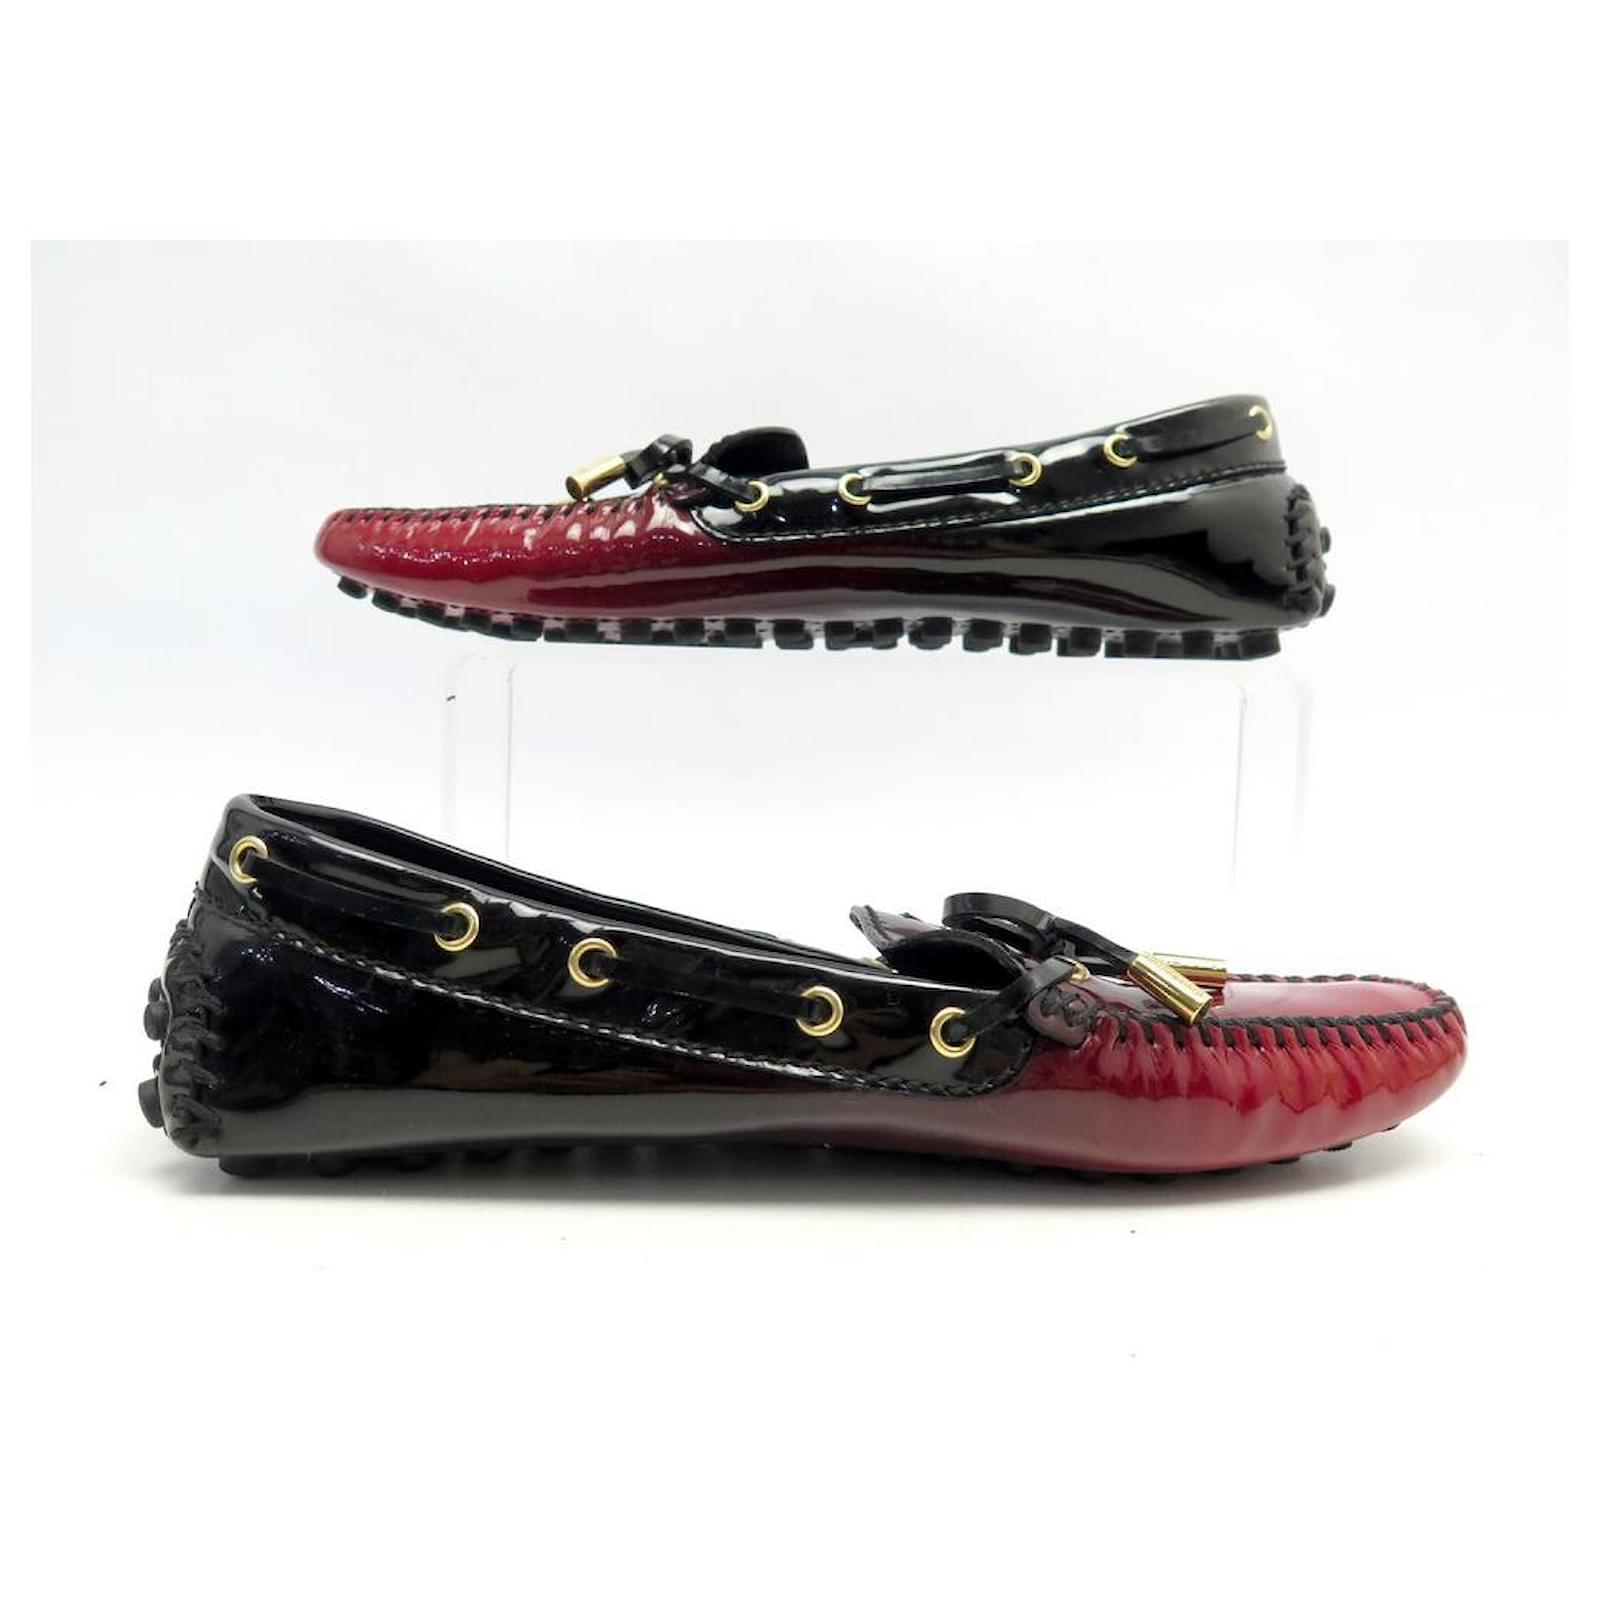 LOUIS VUITTON DRIVER MOCCASIN SHOES 38 RED PATENT LEATHER LOAFERS